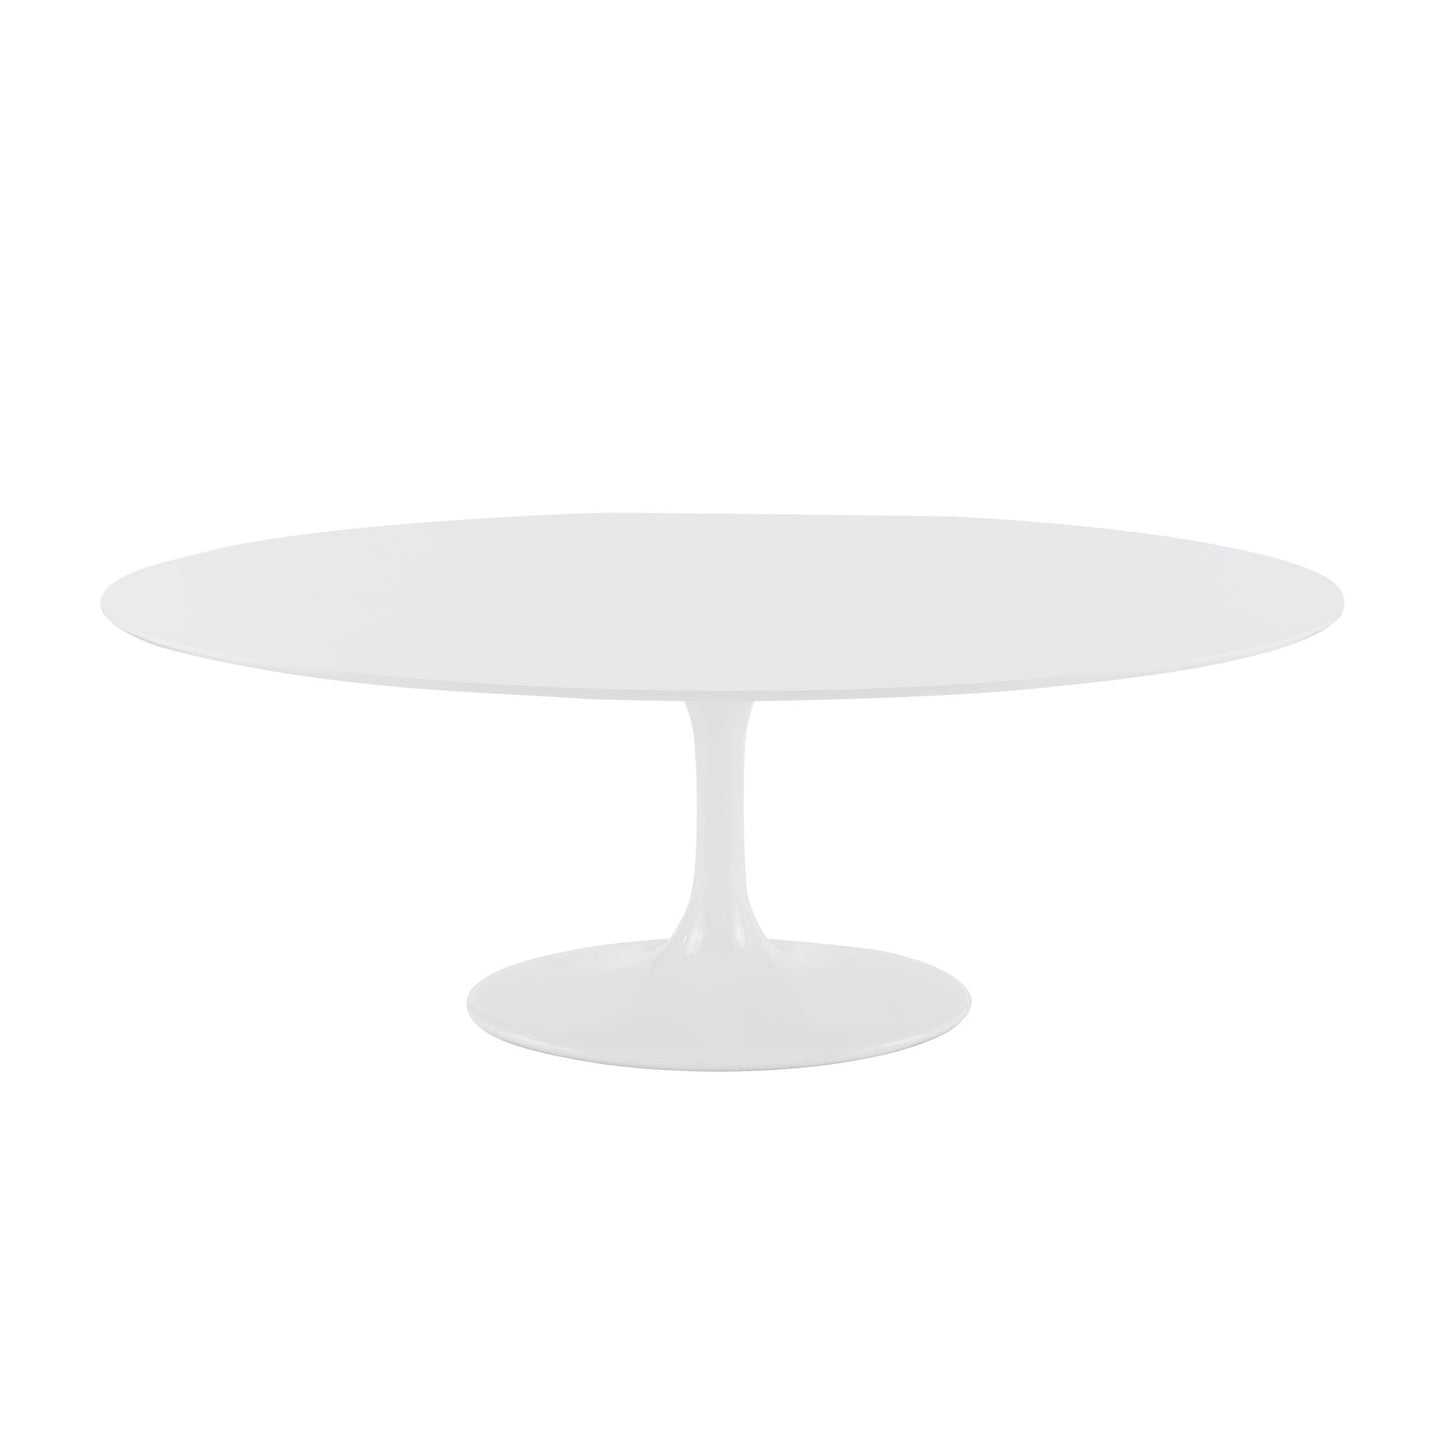 Astrid 79" Oval Table Dining Table Eurostyle     Four Hands, Mid Century Modern Furniture, Old Bones Furniture Company, Old Bones Co, Modern Mid Century, Designer Furniture, https://www.oldbonesco.com/